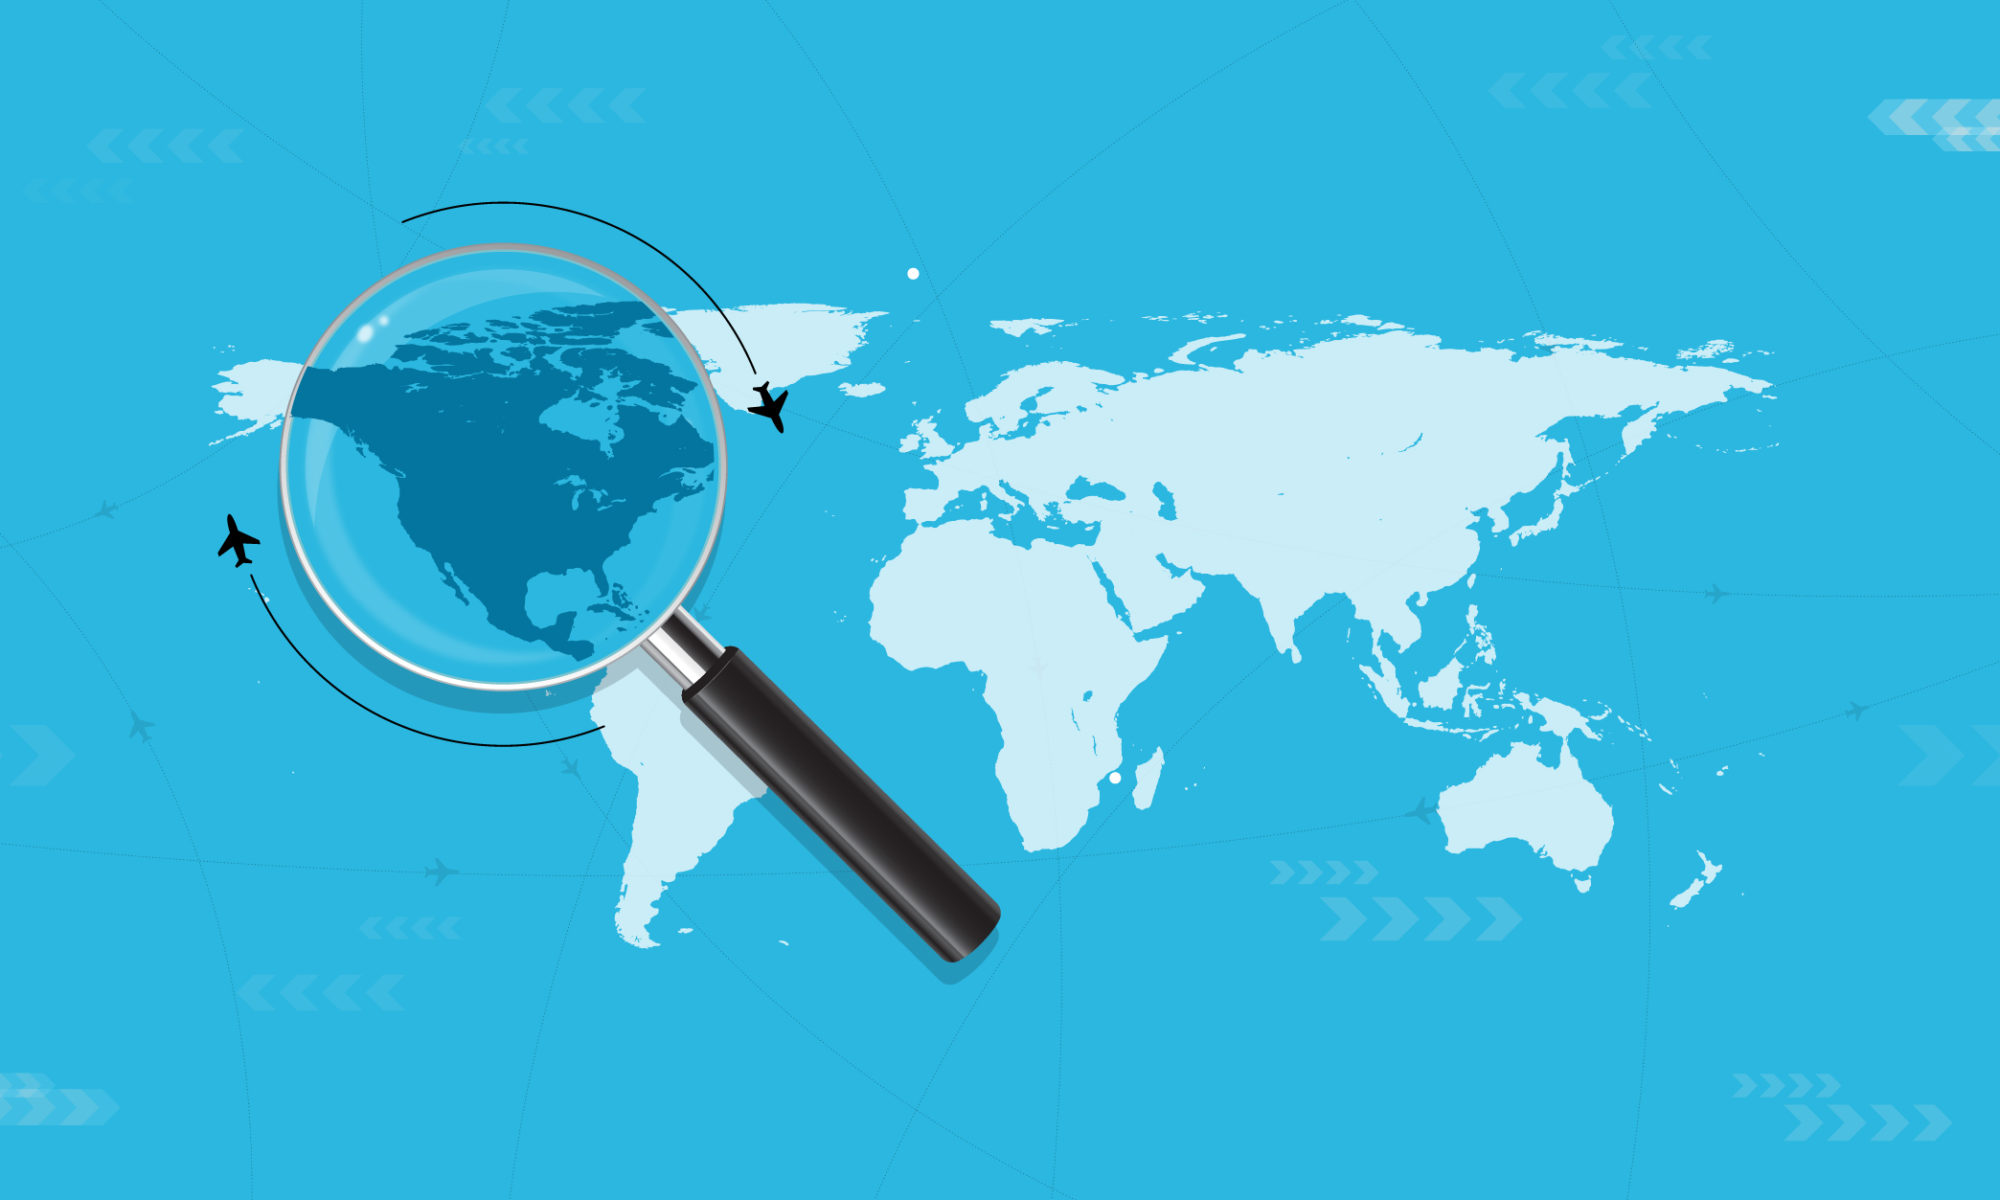 Vector image of a magnifying glass on top of Canada, in a world map